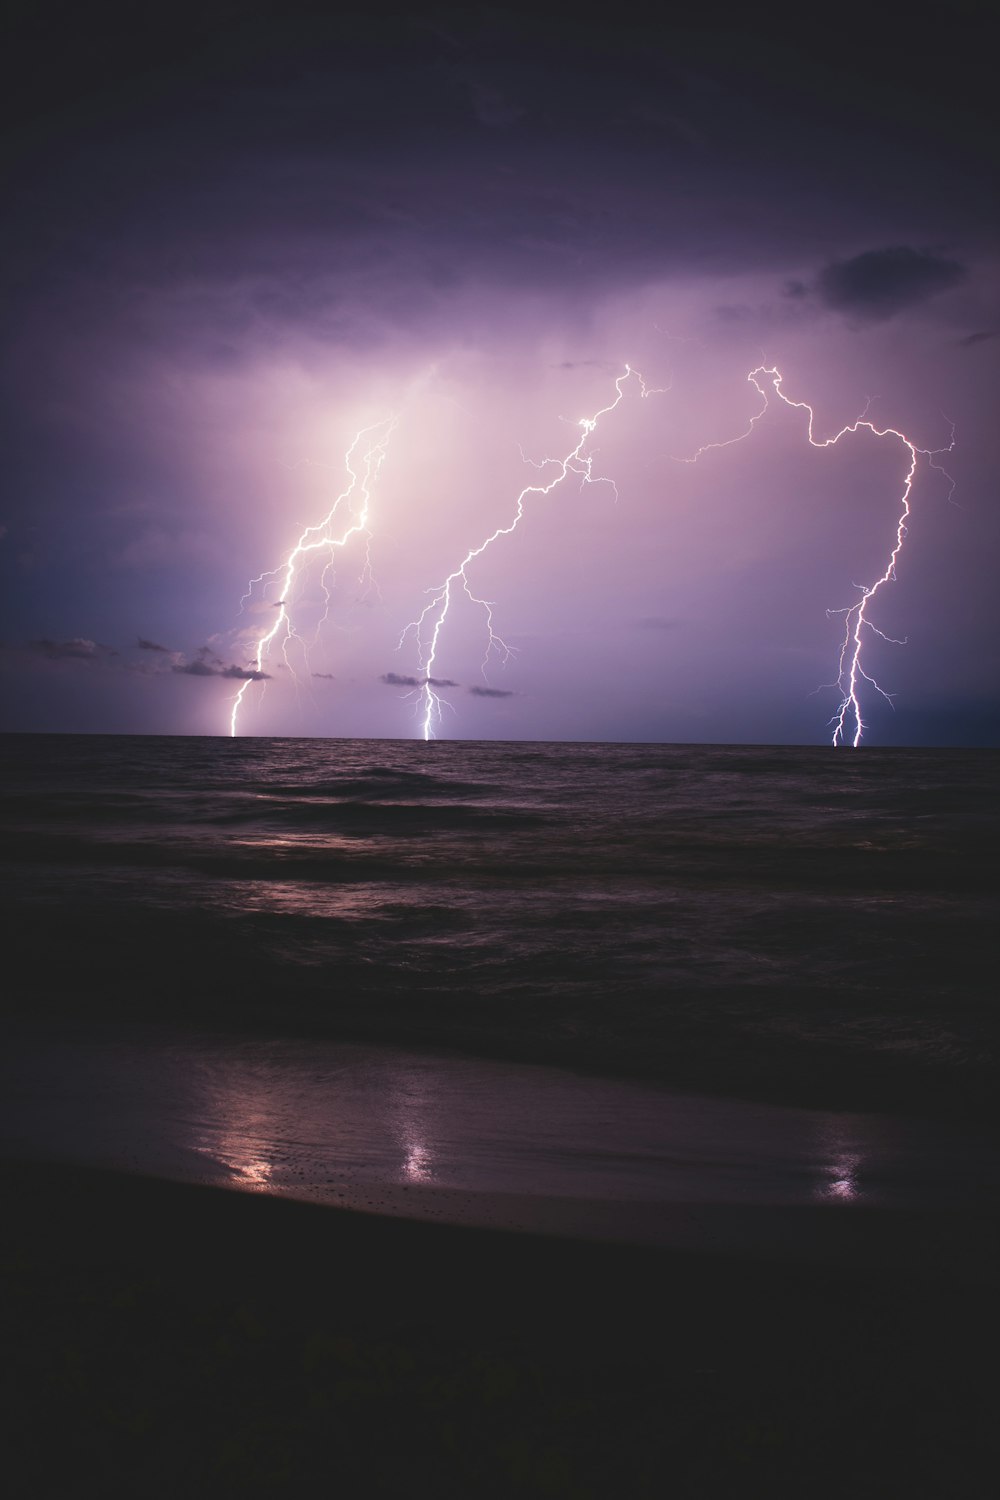 seashore and ocean with lightning during night time